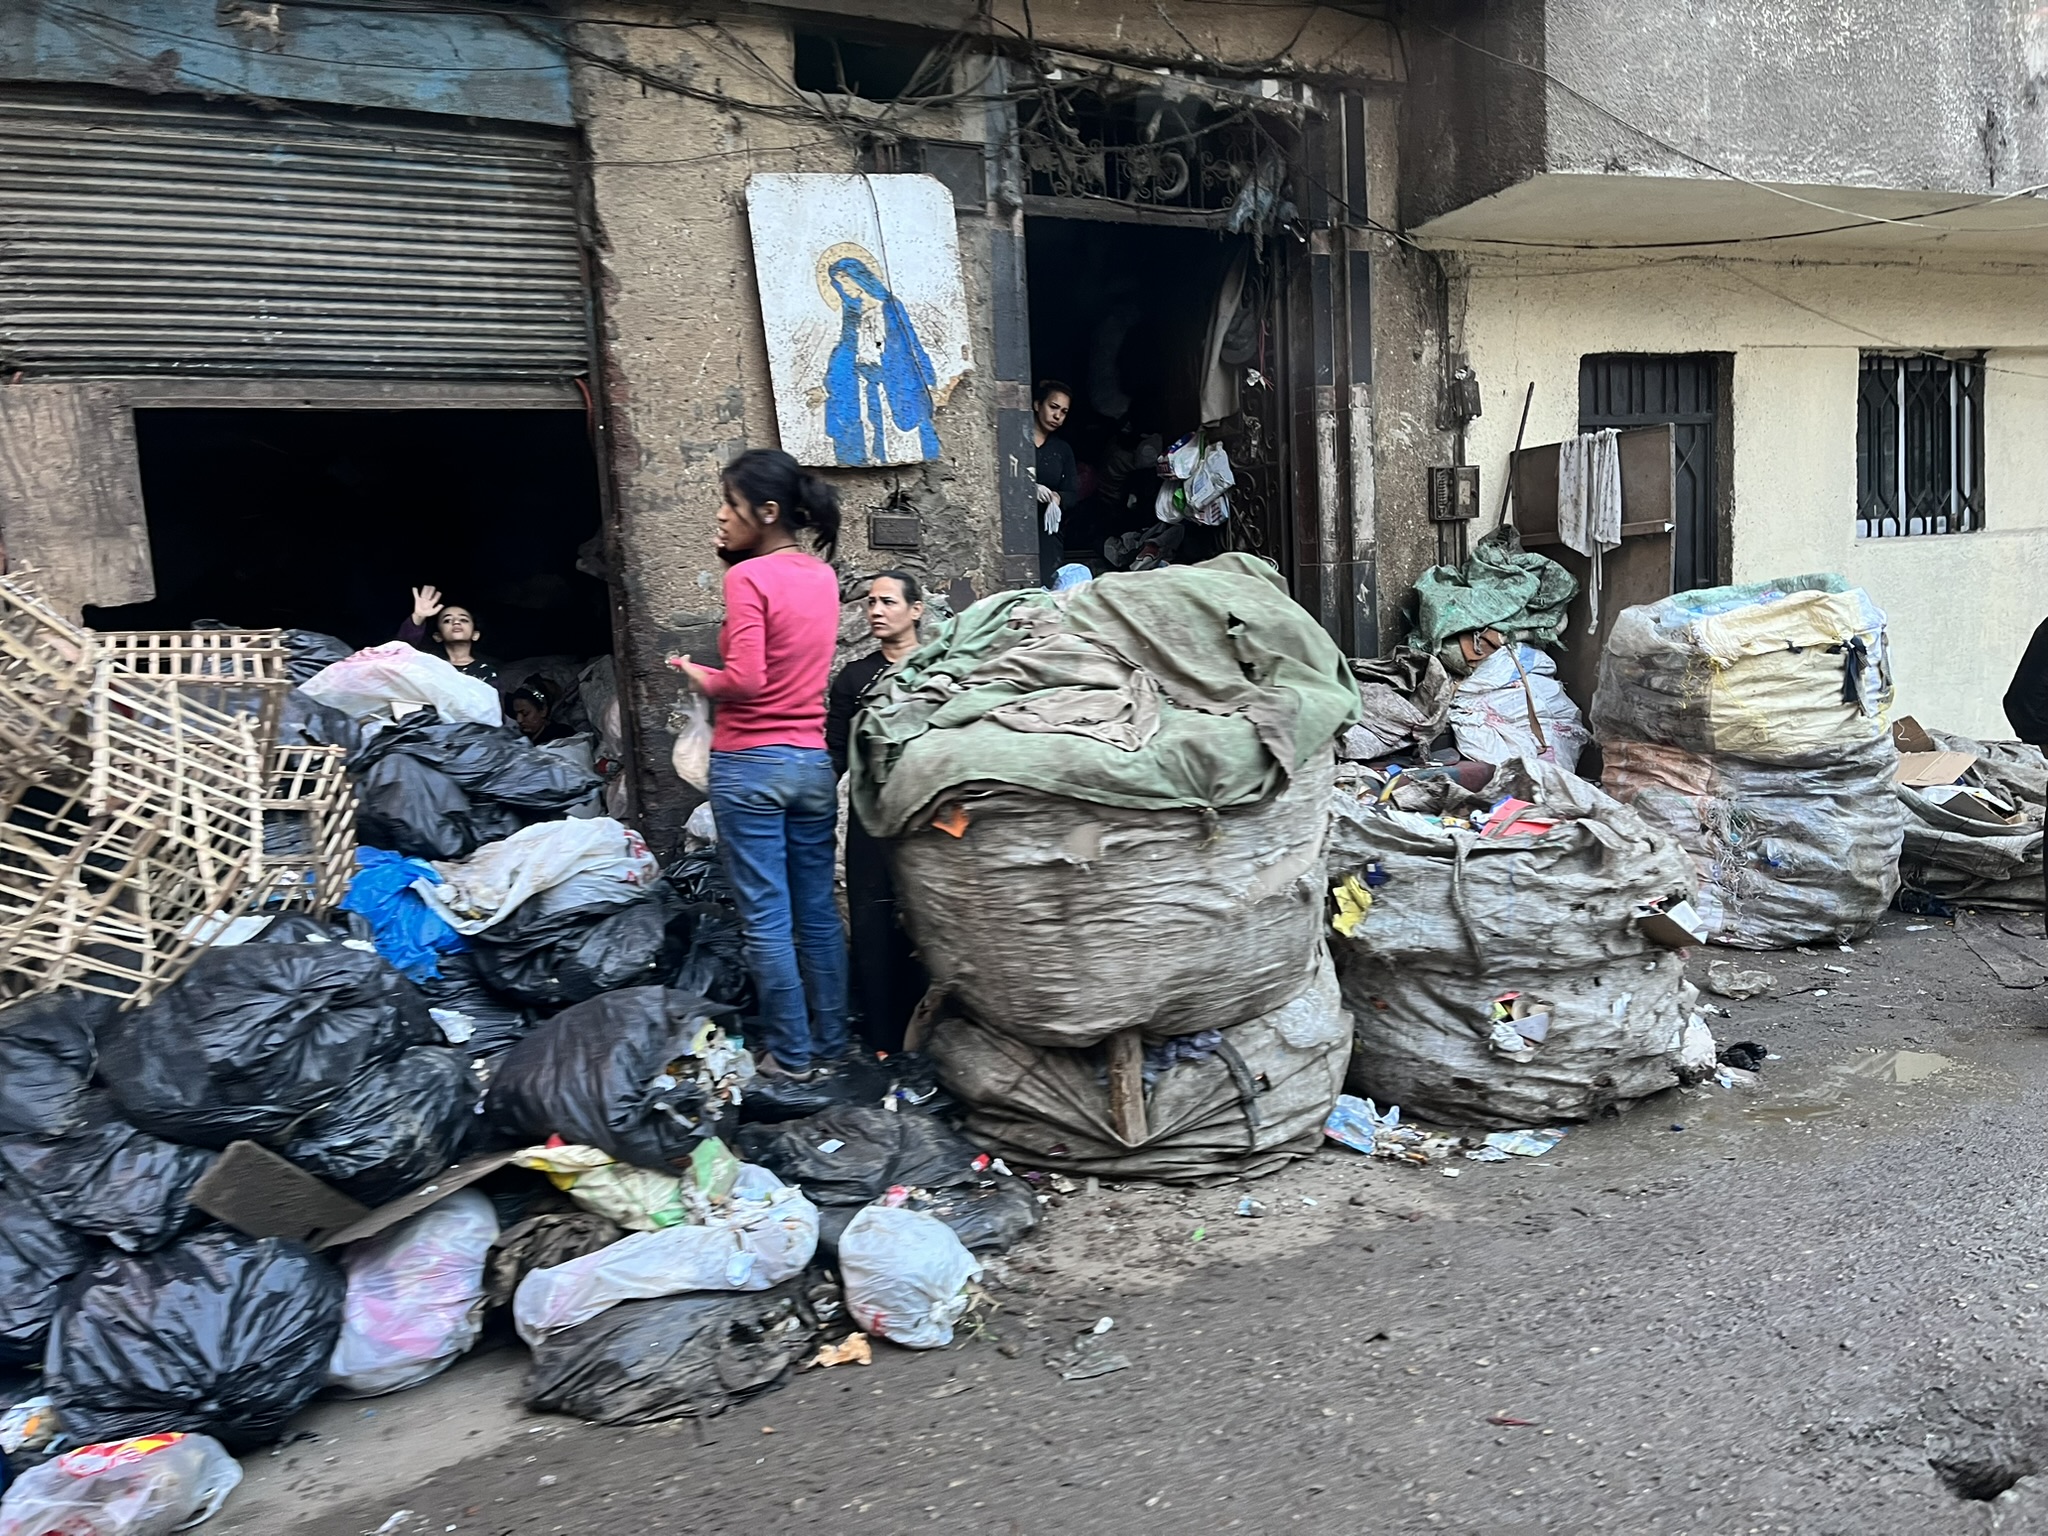 A child walks between bags of rubbish in a pile